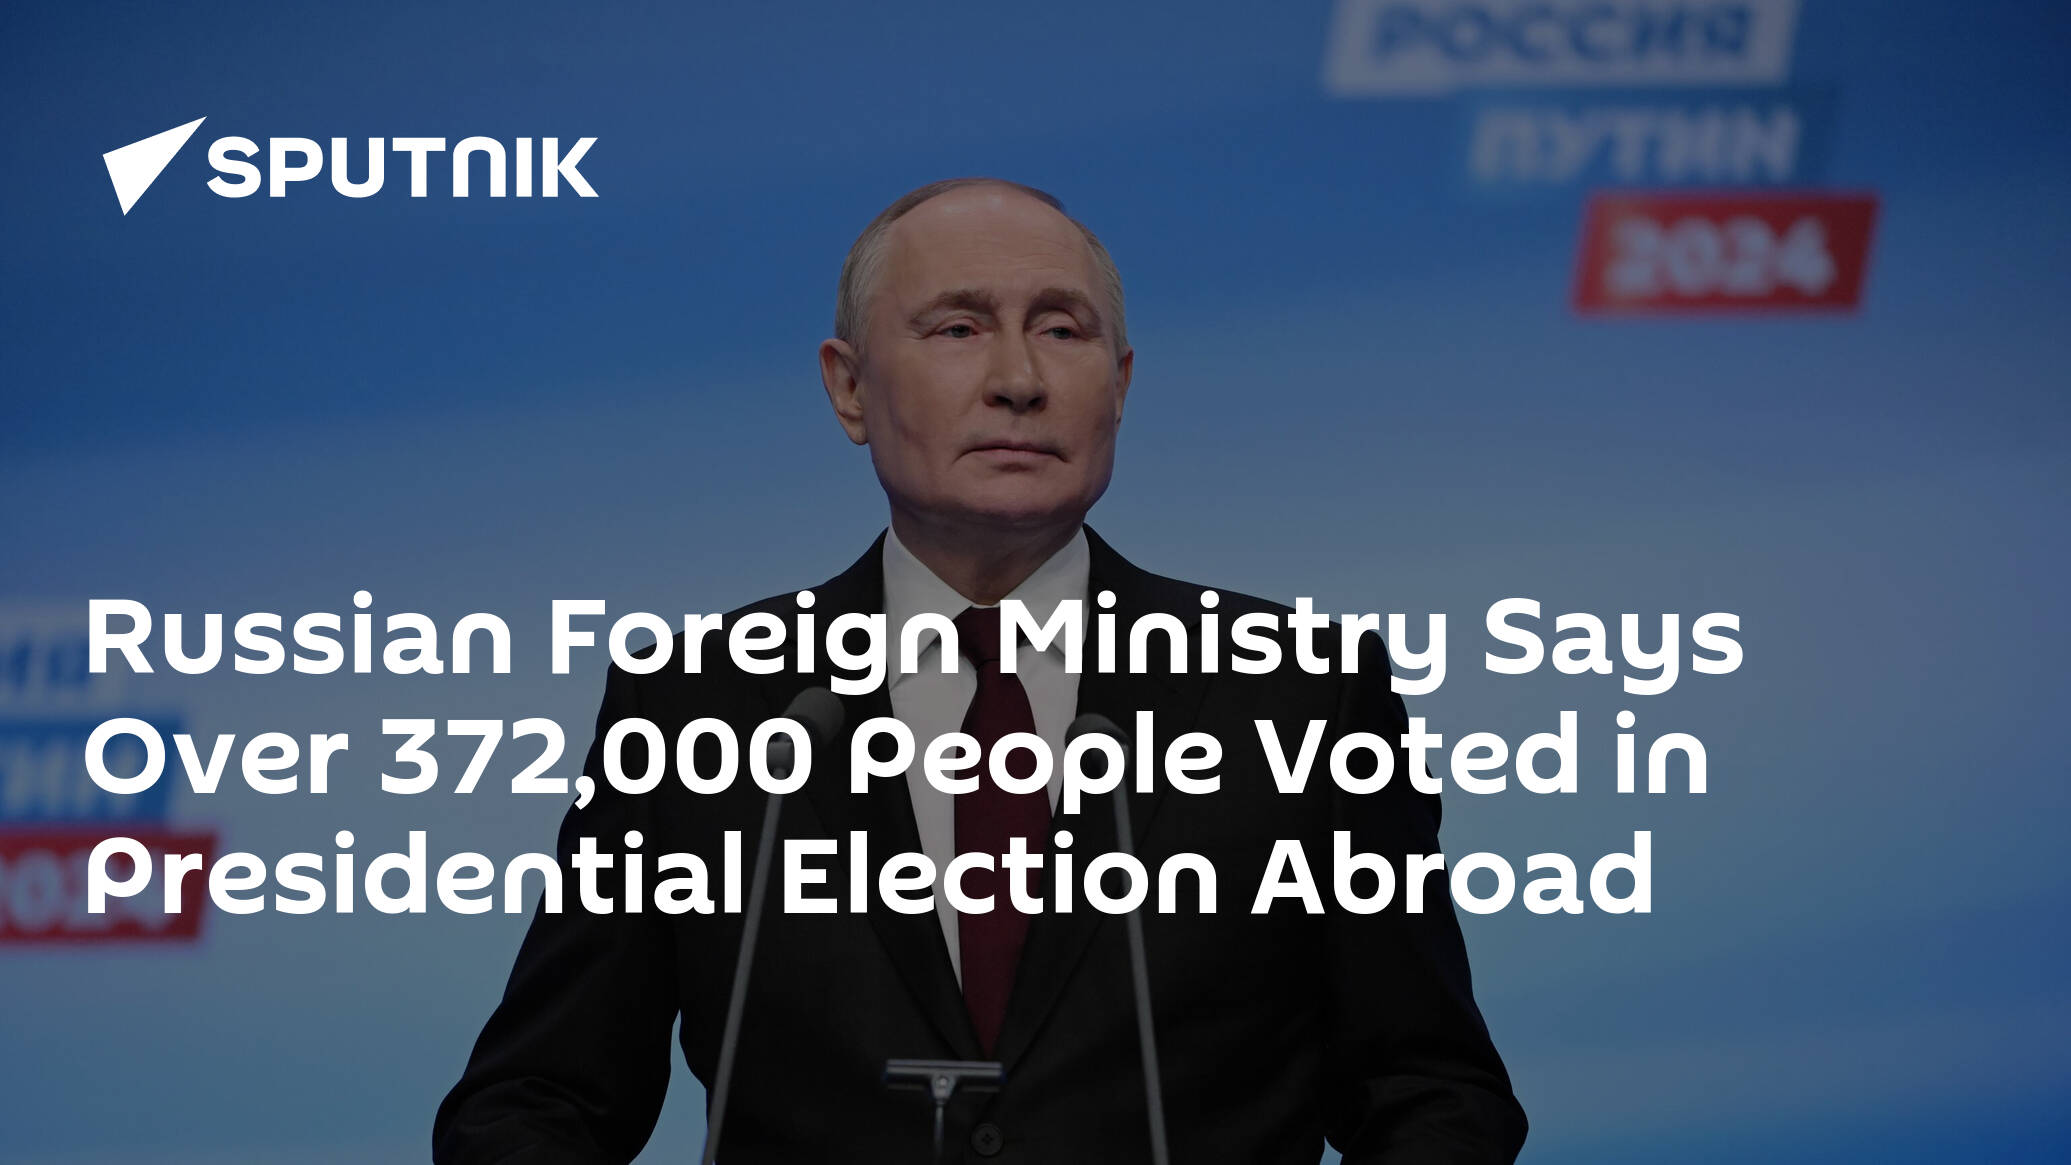 Russian Foreign Ministry Says Over 372,000 People Voted in Presidential Election Abroad